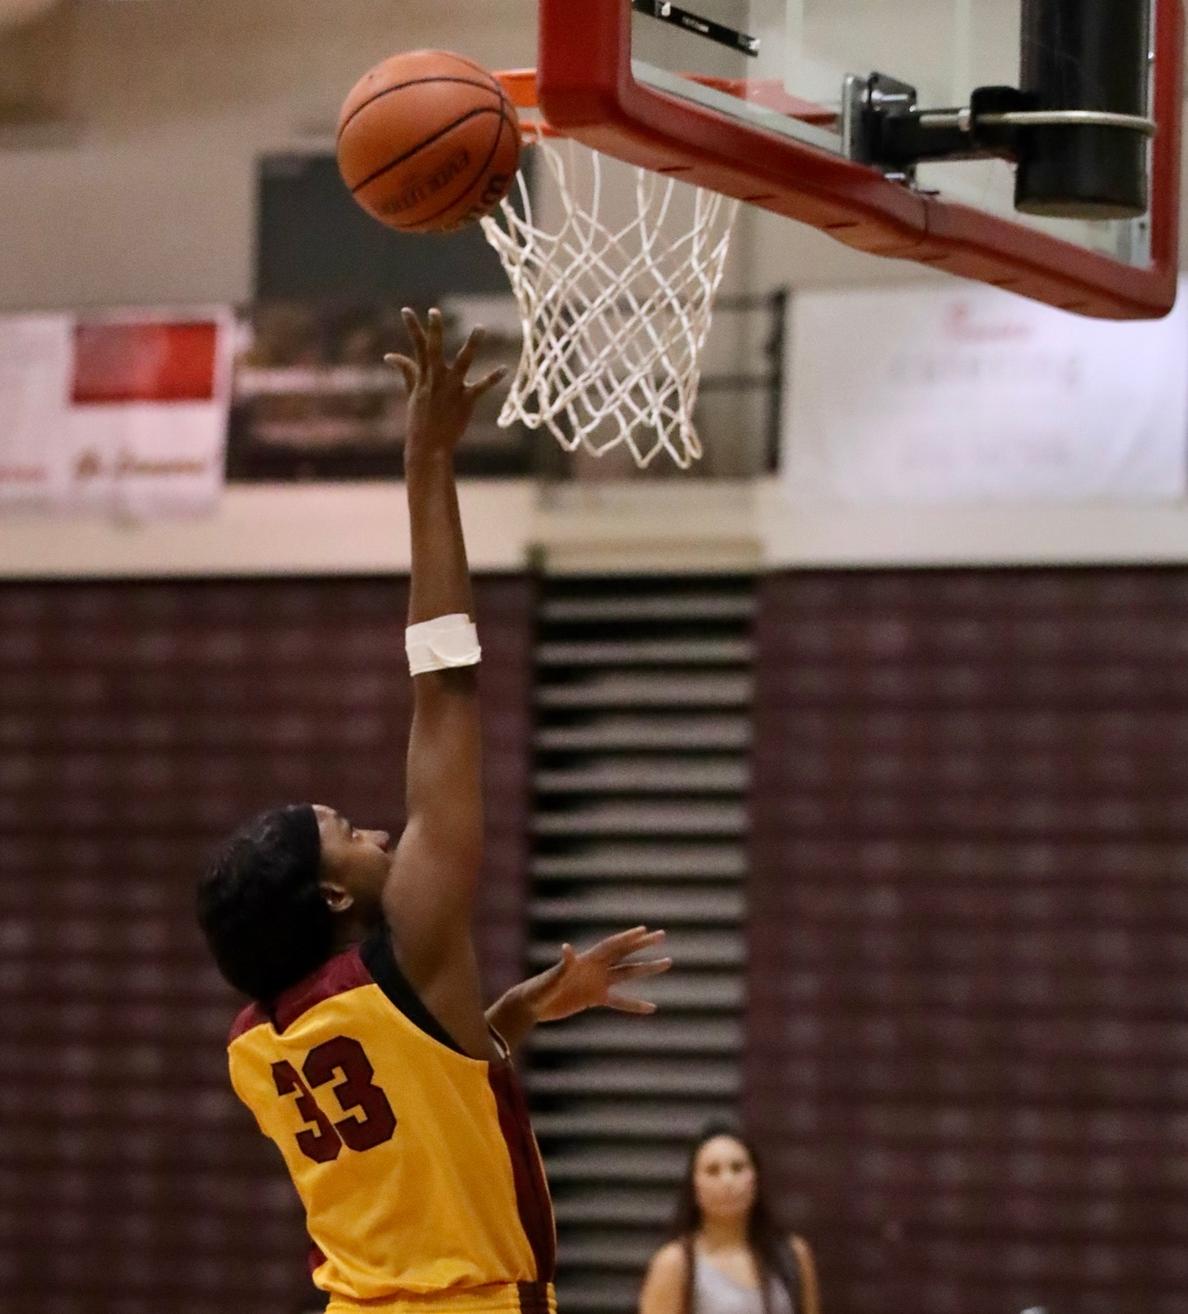 Dariel Johnson goes up for a layup in a recent game, photo by Michael Watkins.